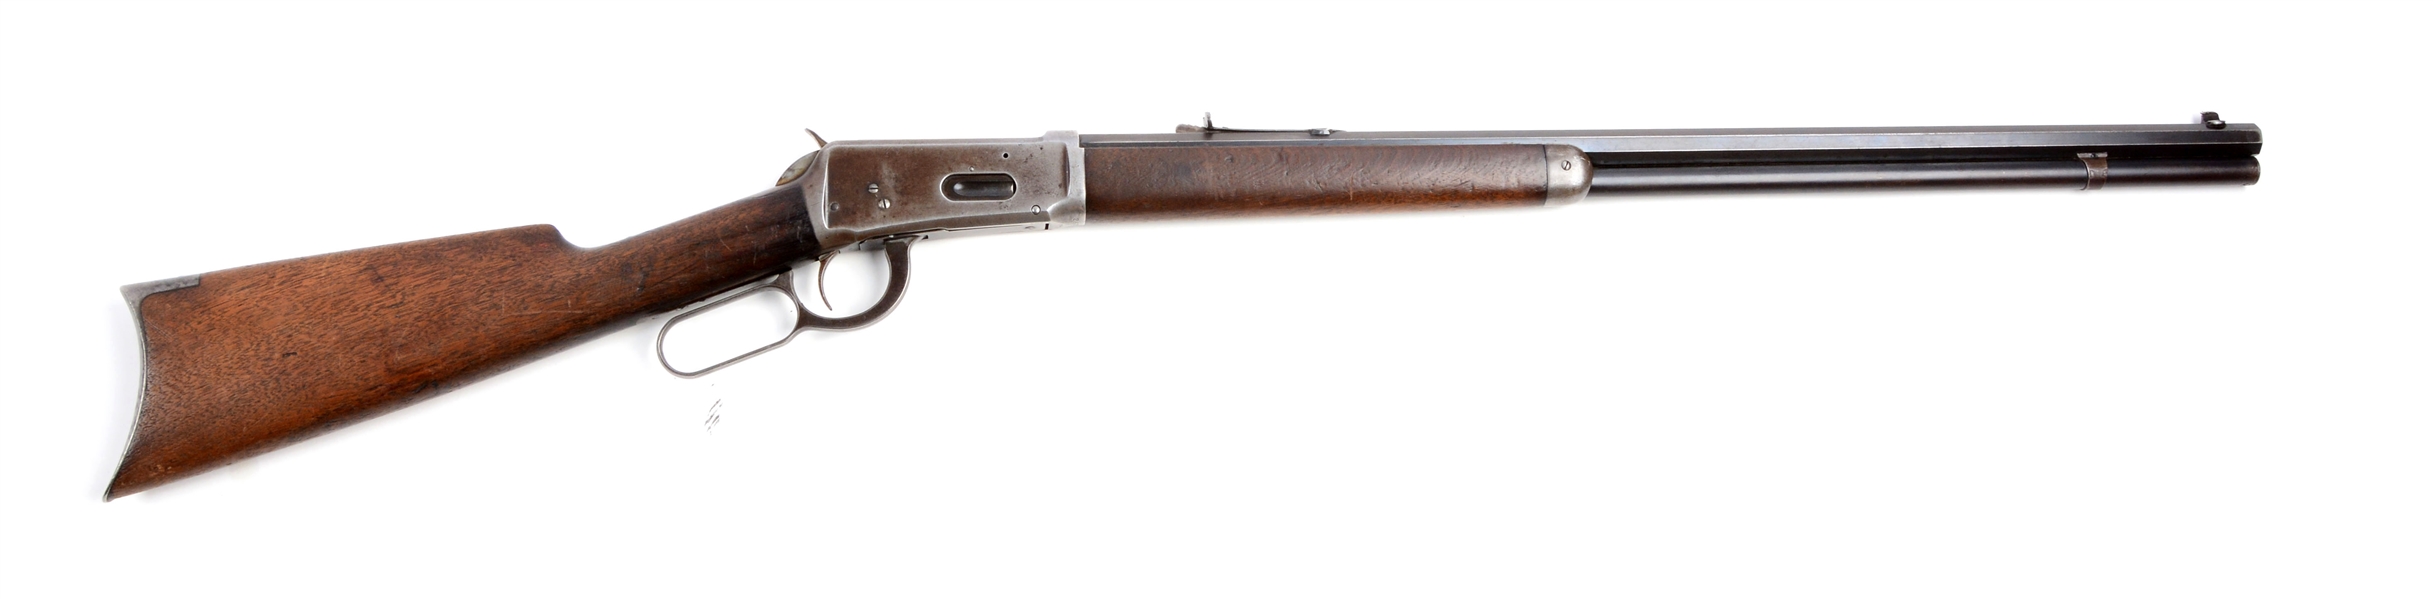 (C^) WINCHESTER MODEL 1894 LEVER ACTION RIFLE.